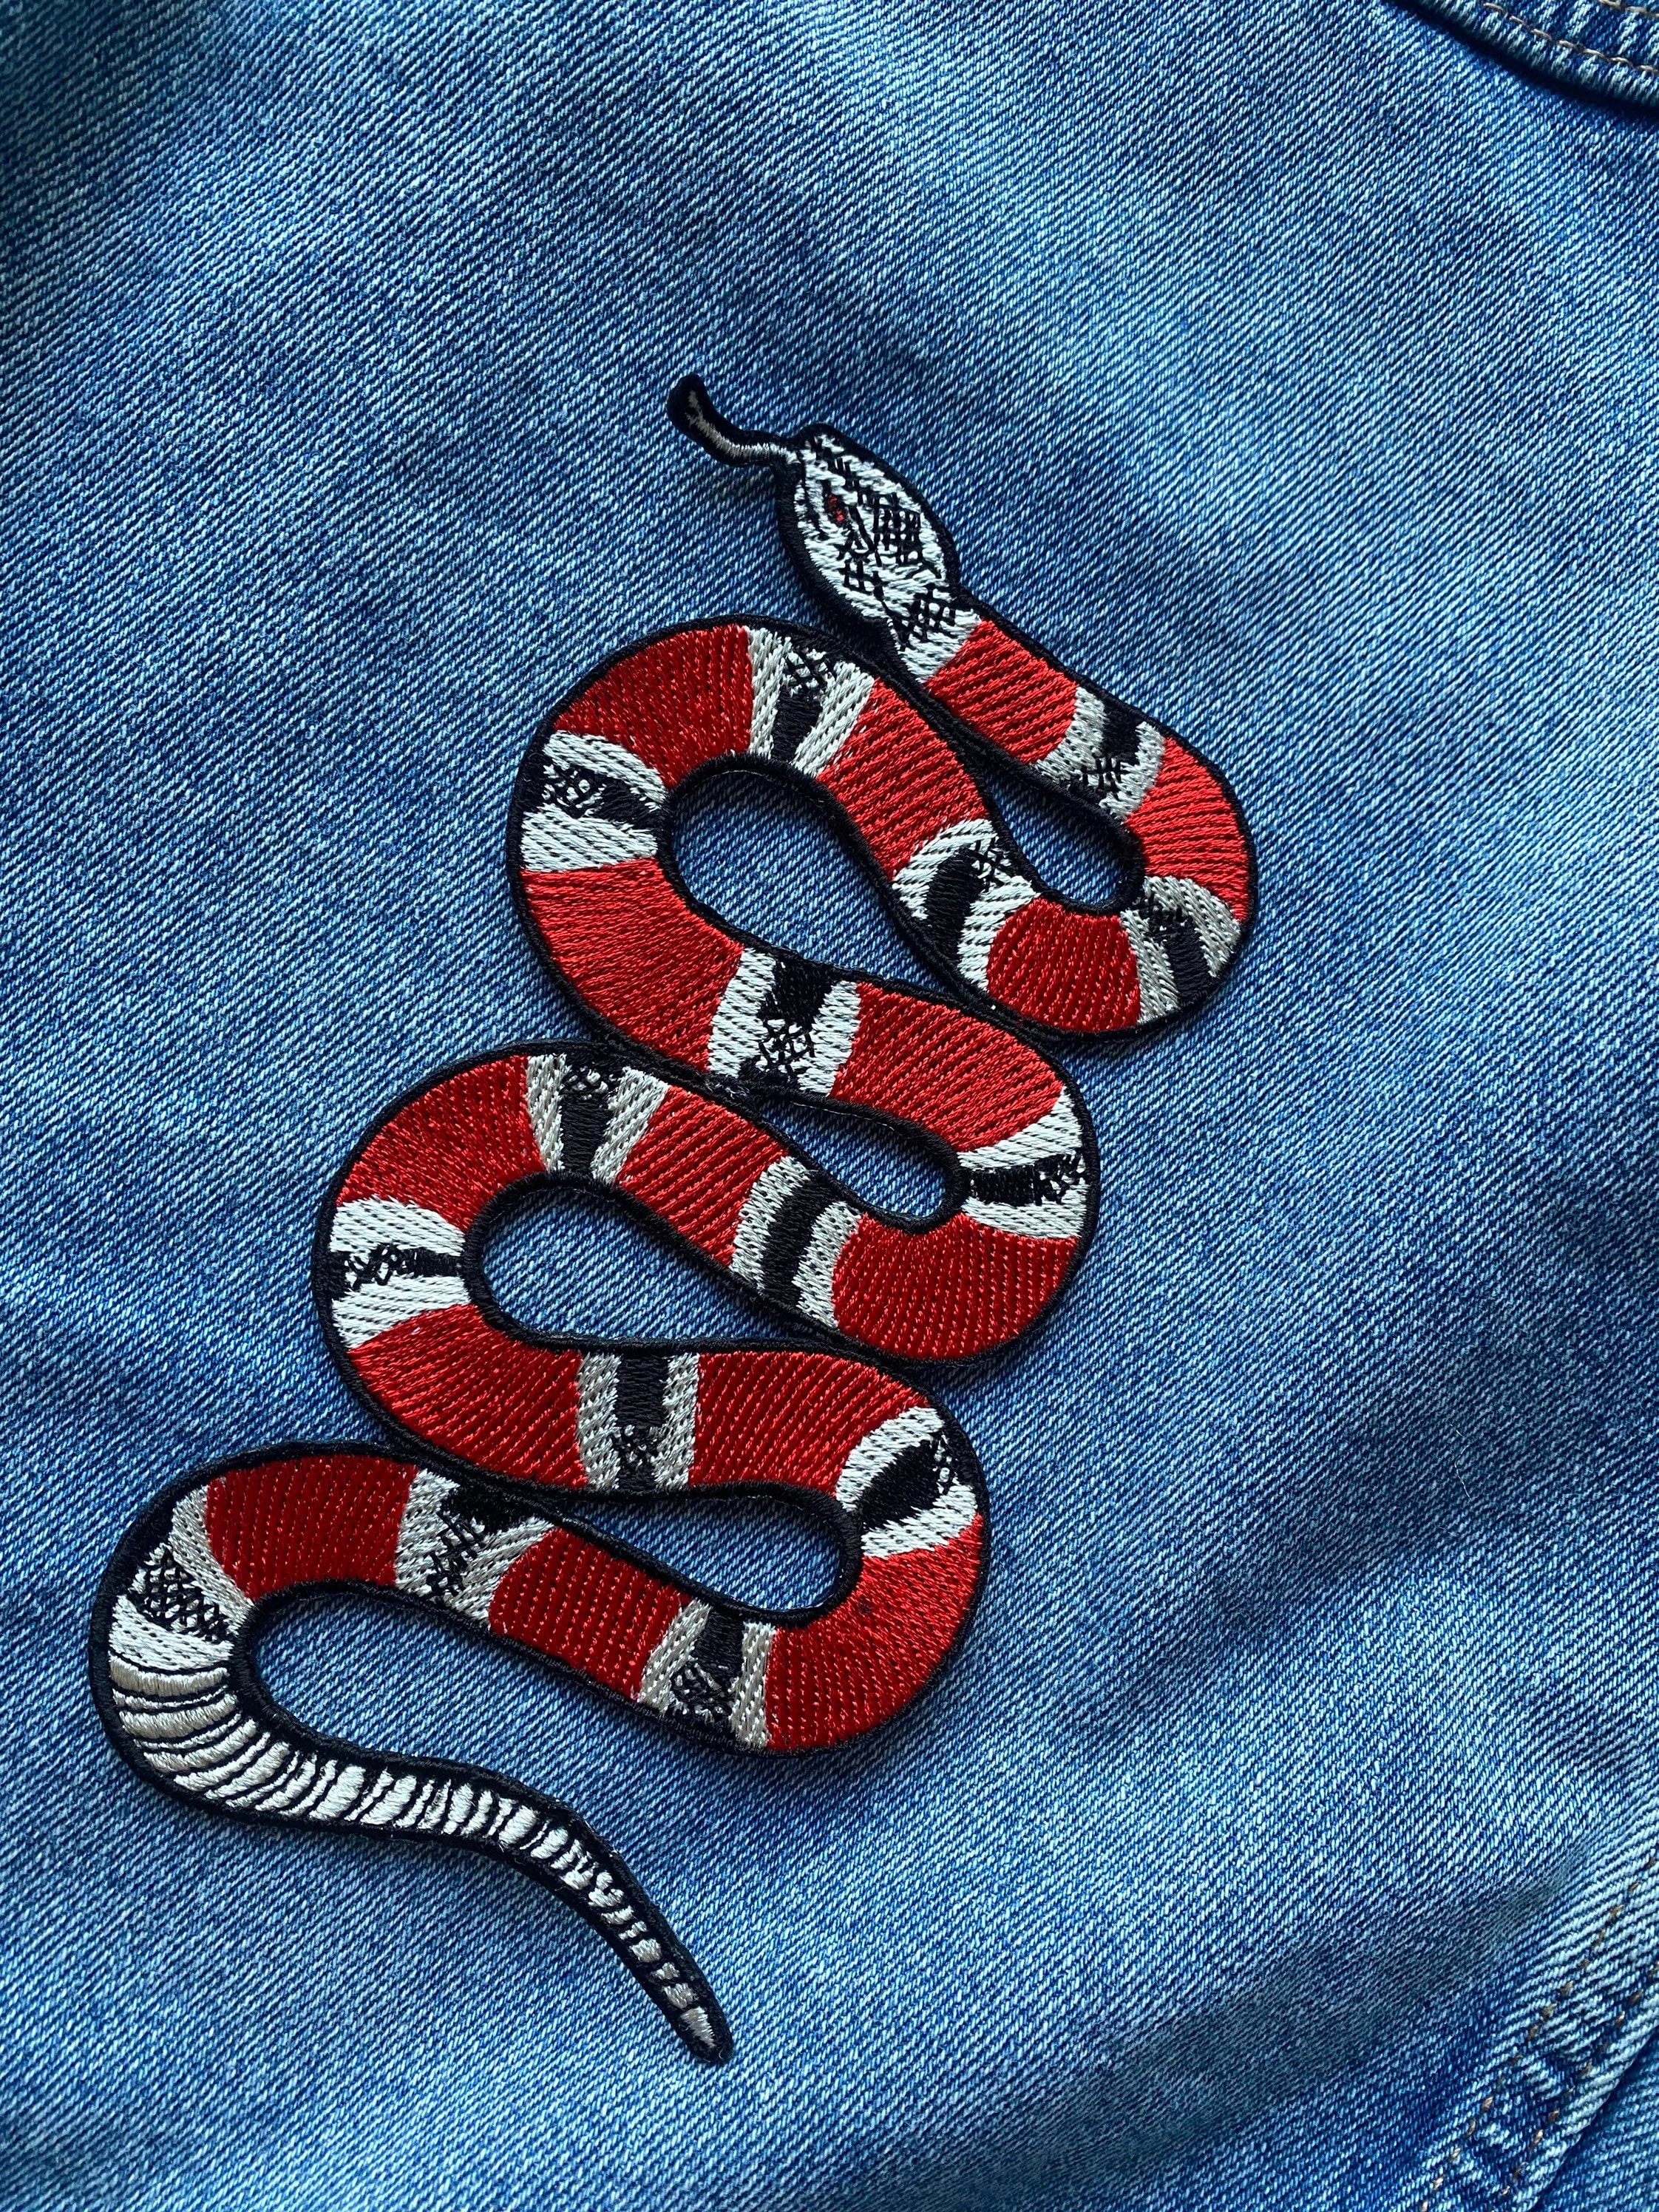 gucci wrap #Gucci #snake #charger #sunday